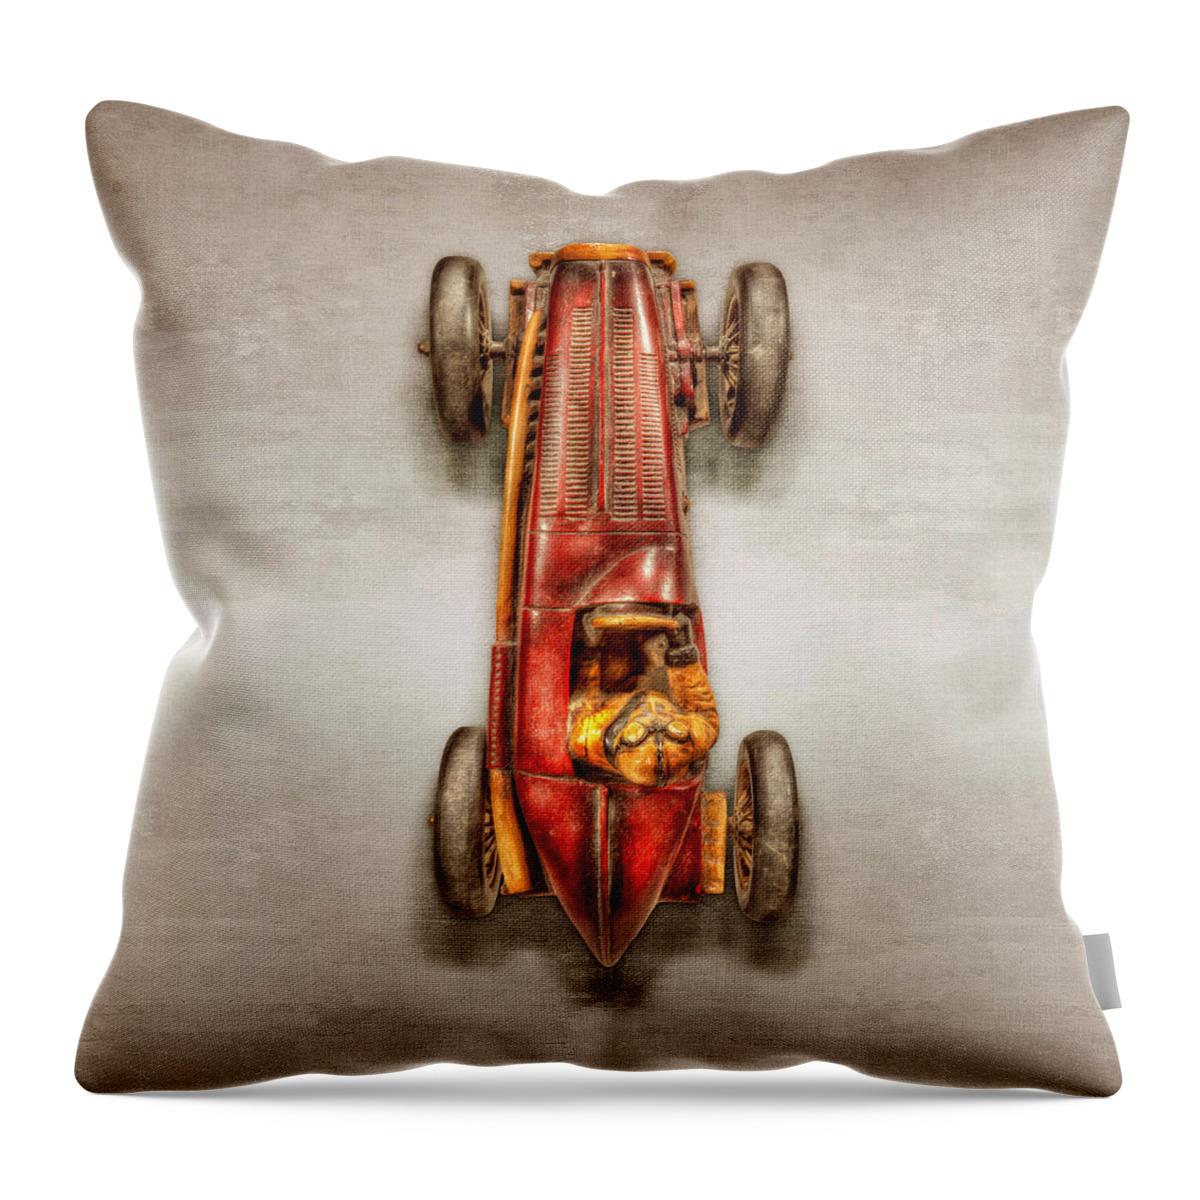 Antique Throw Pillow featuring the photograph Red Racer Top by YoPedro